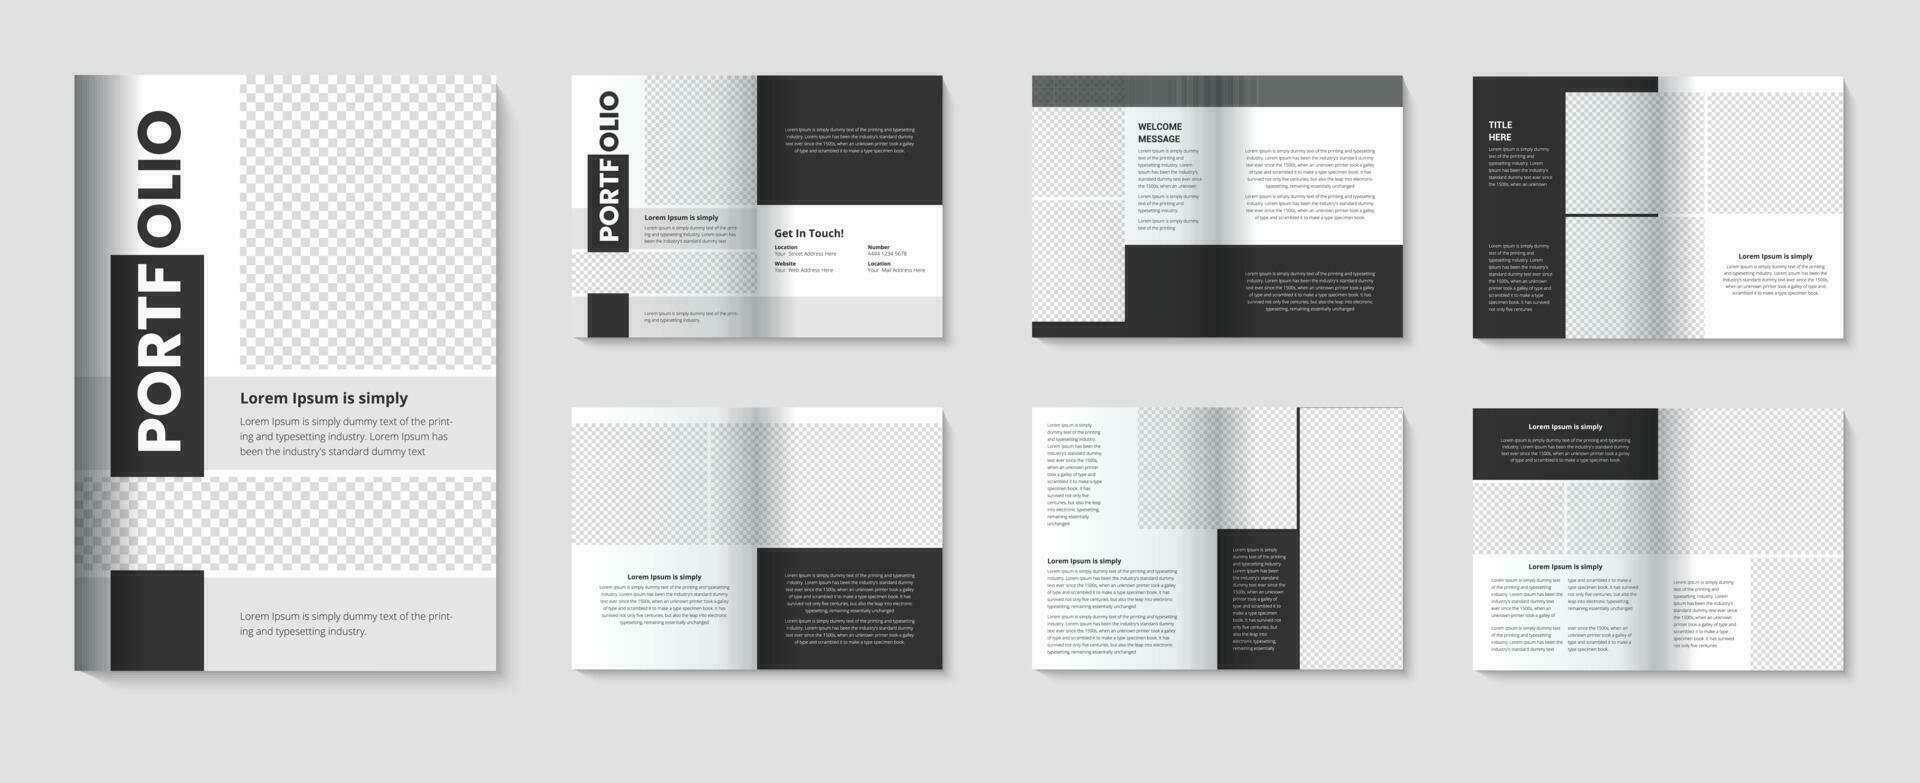 Photography portfolio design with booklet template for multipurpose business pro download vector